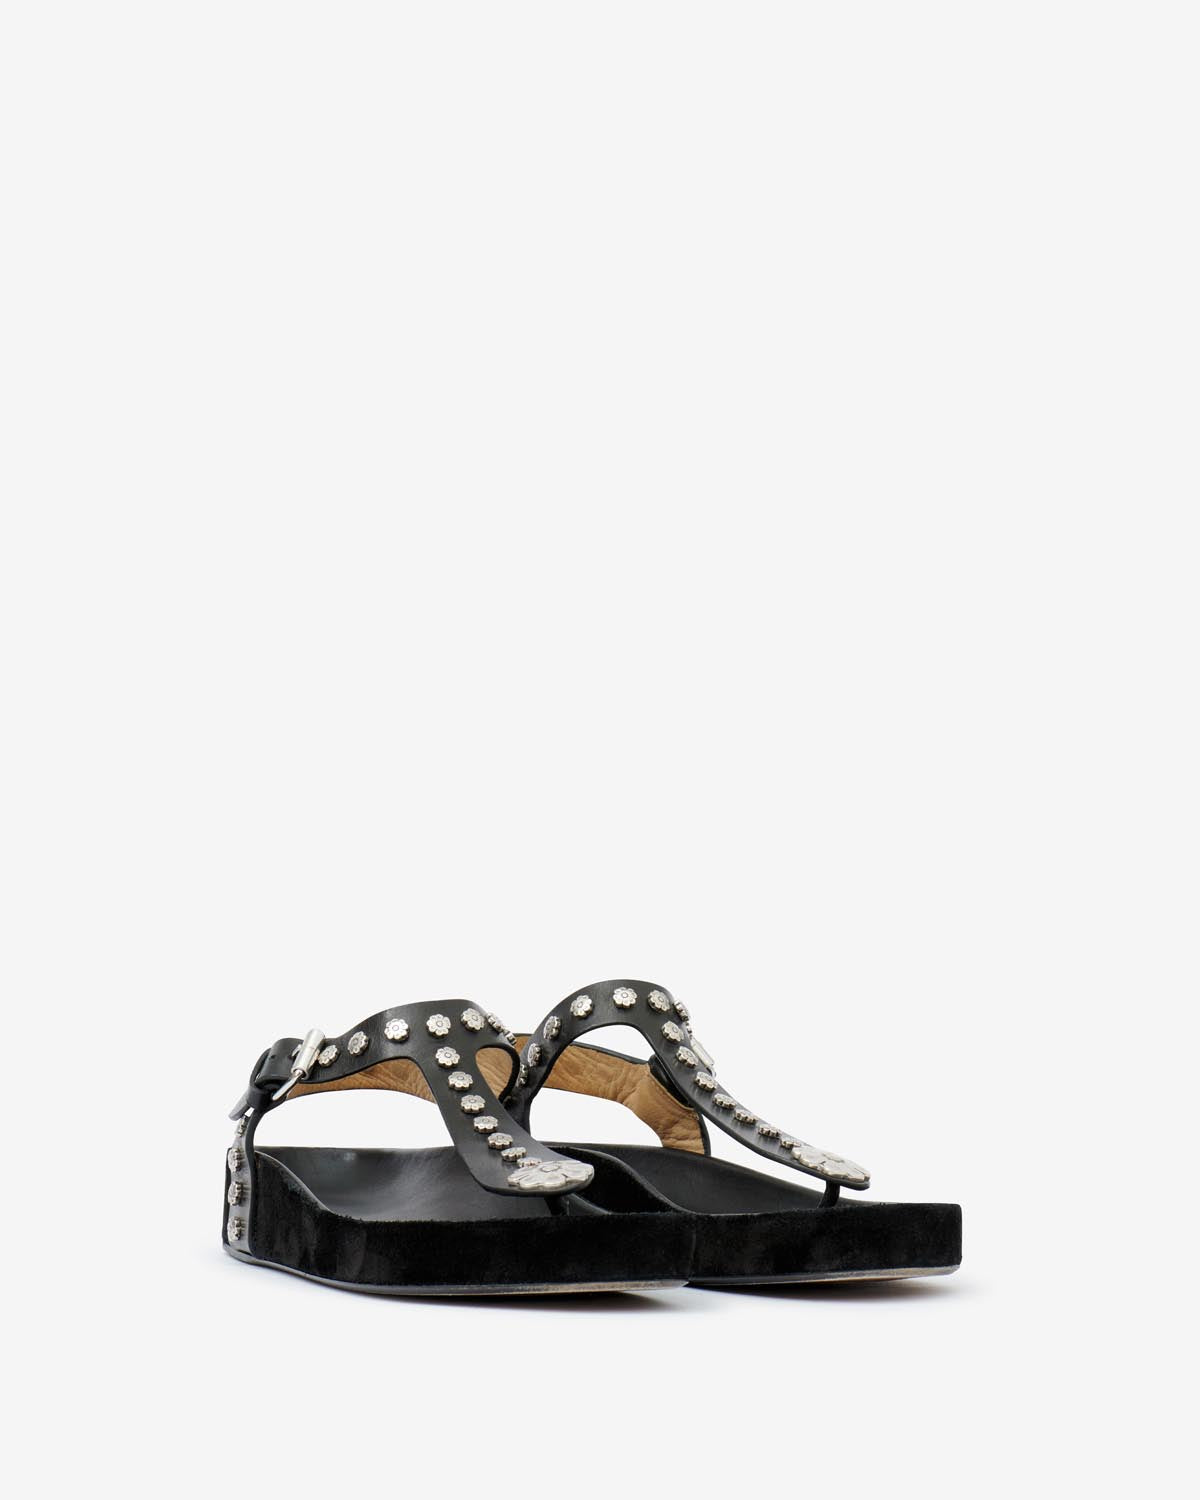 Enore sandals Woman Black and silver 4